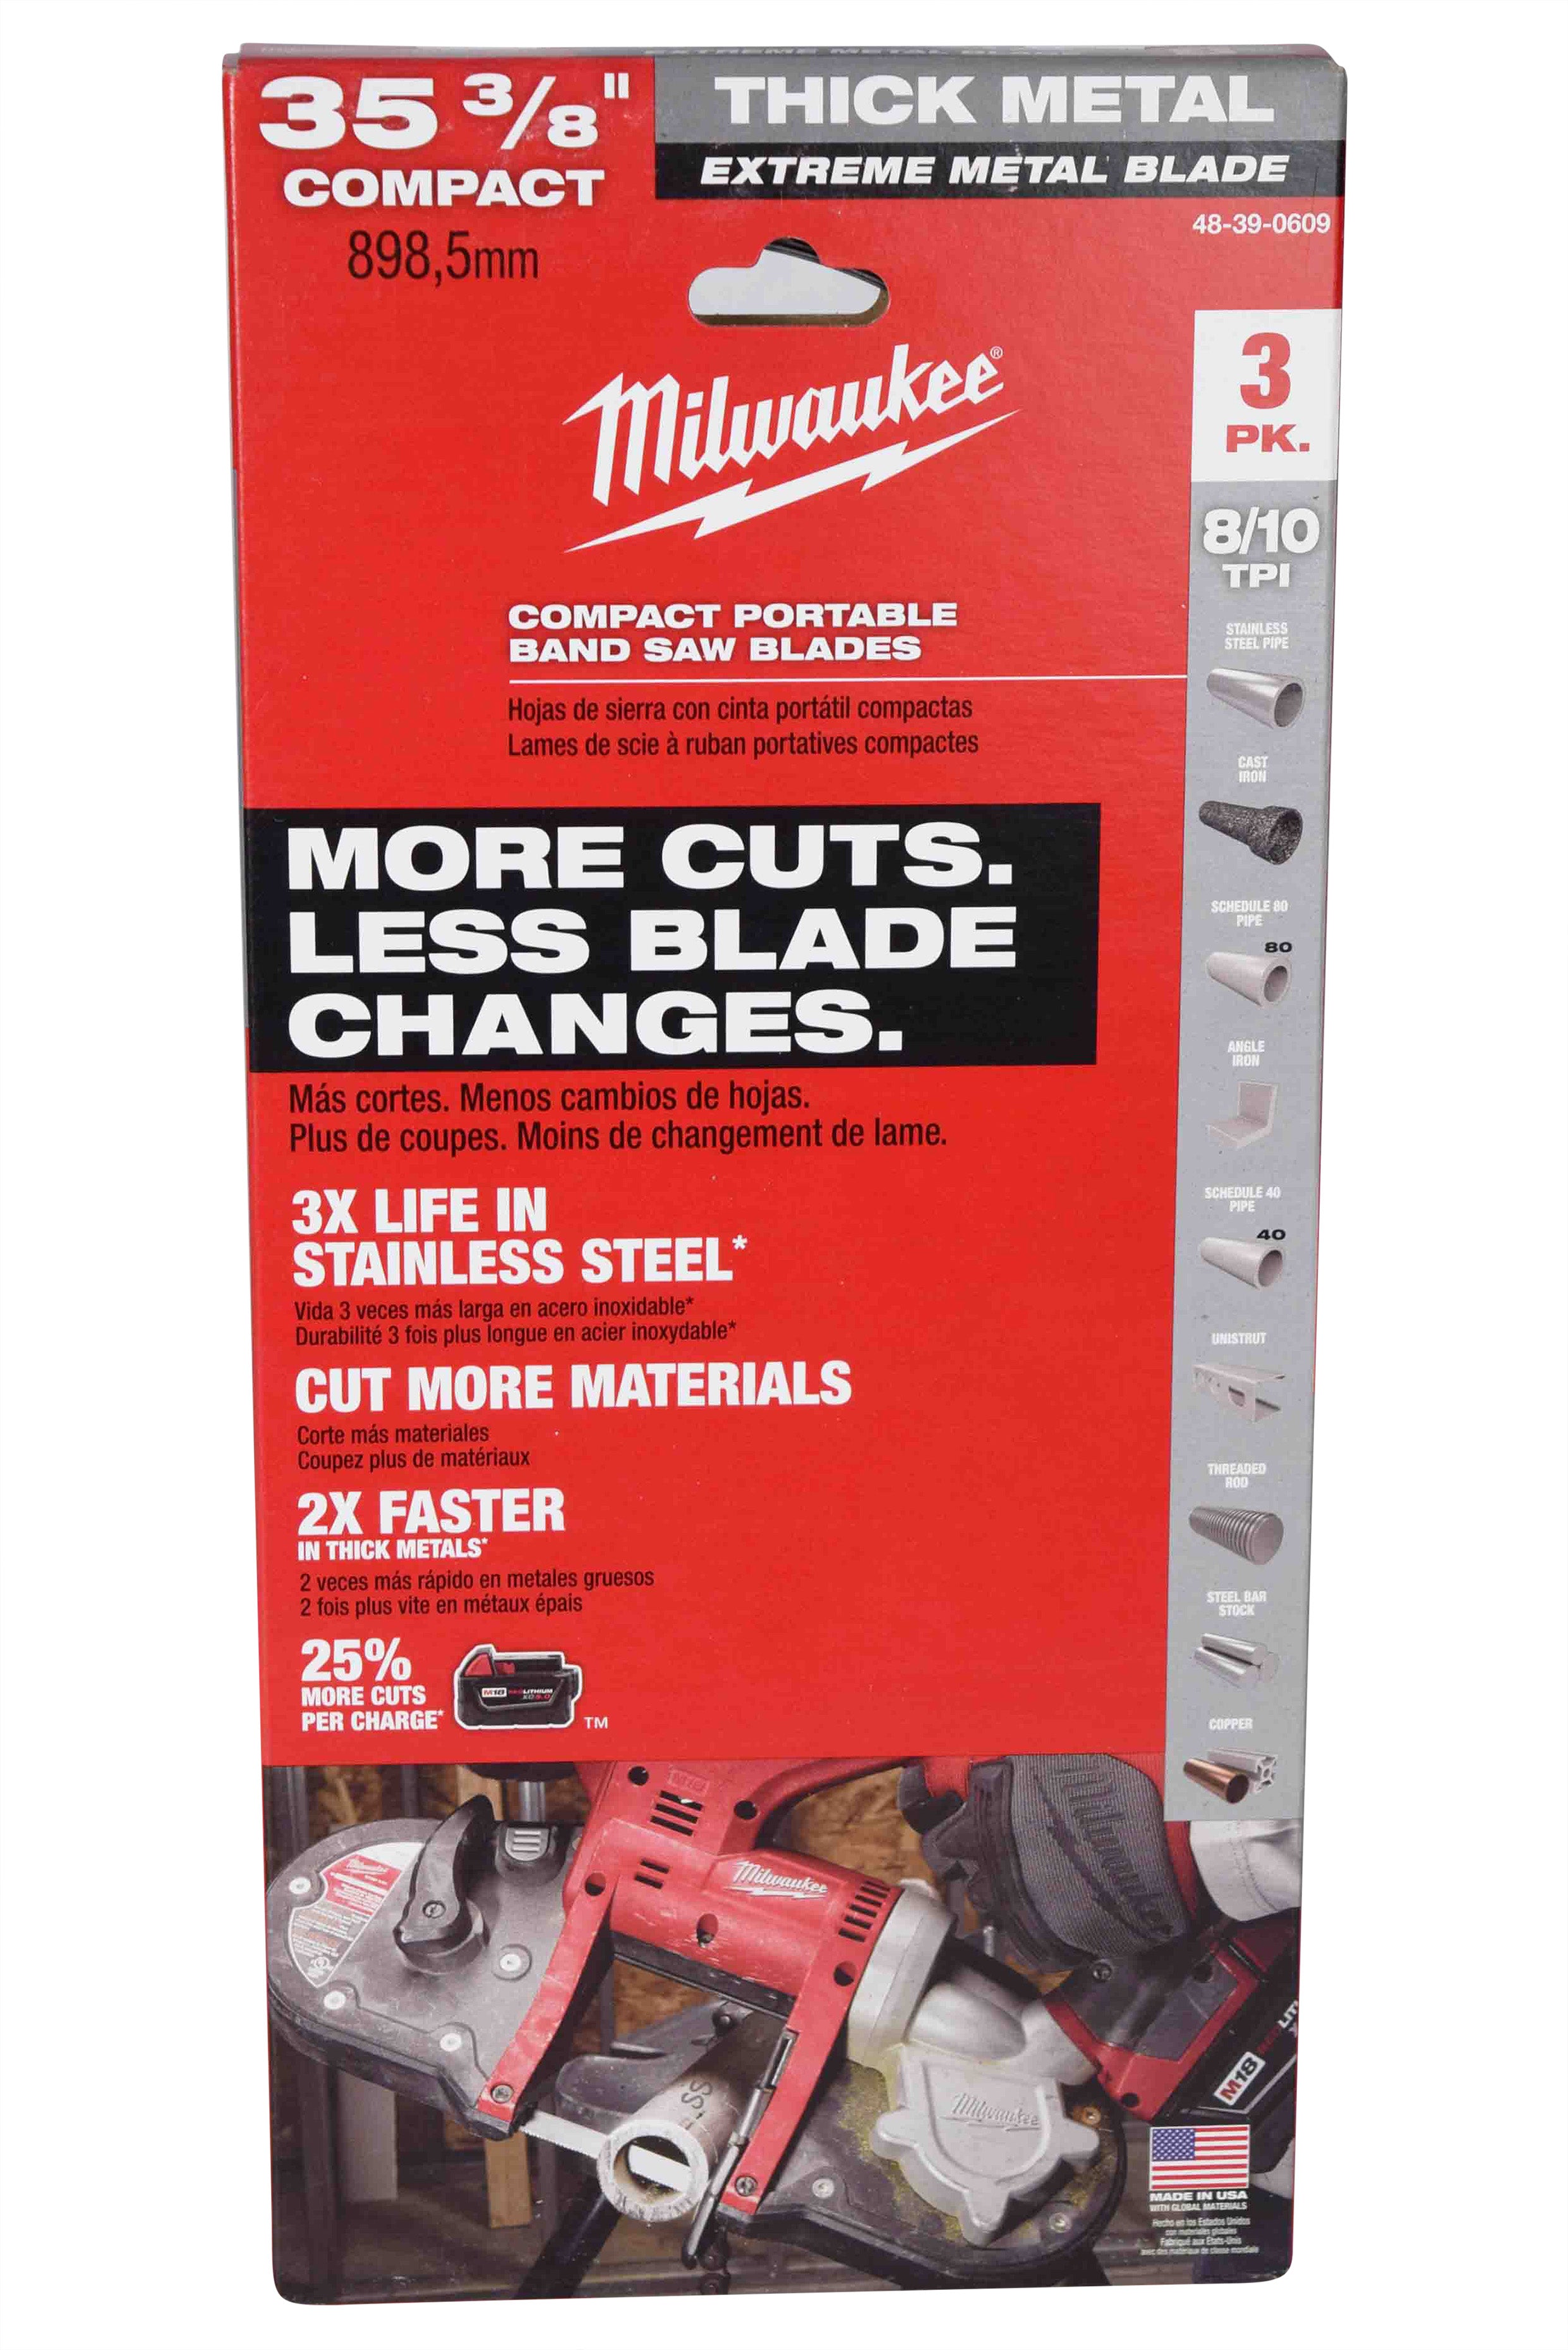 Milwaukee 48-39-0609 35-3/8inch 8-10 Tpi Extreme Thick Metal Compact